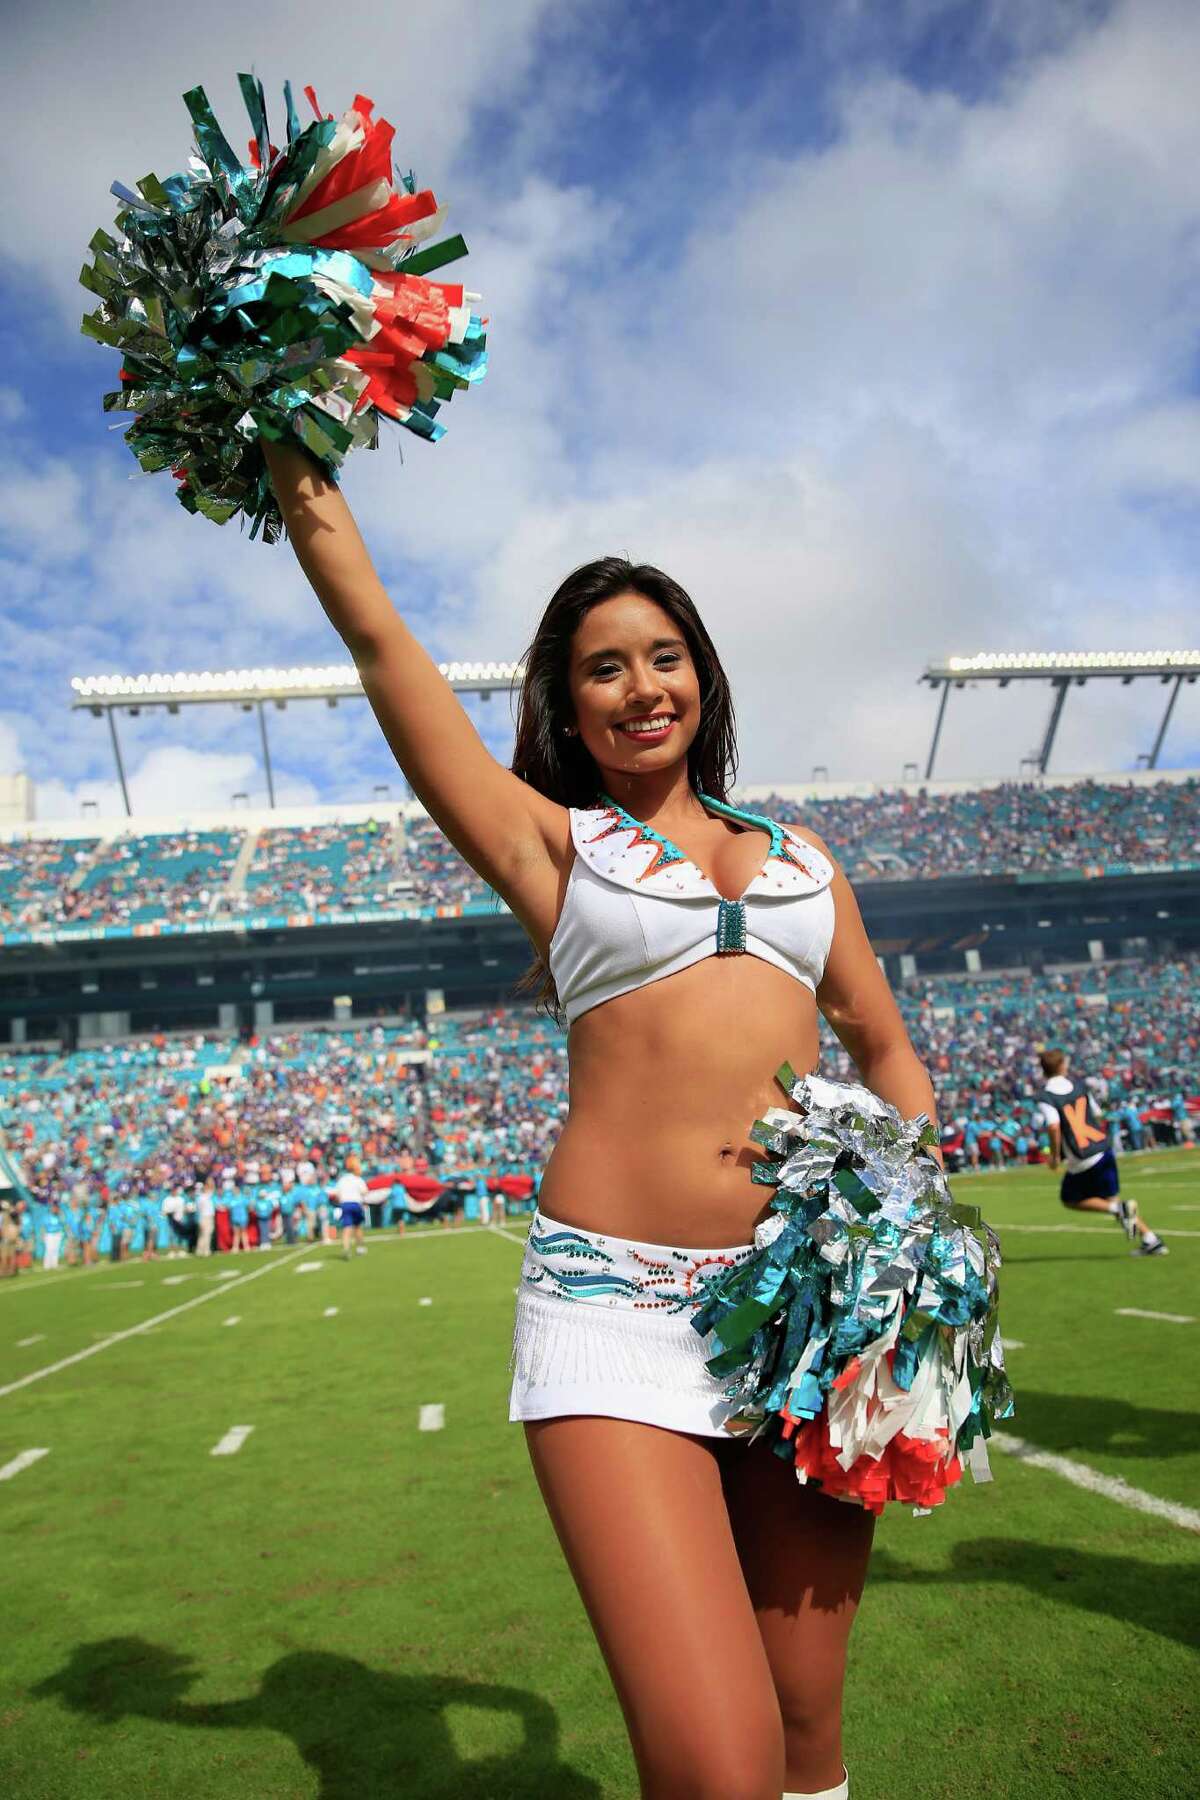 MIAMI GARDENS, FL - DECEMBER 06: A Miami Dolphins cheerleader performs during a game between the Miami Dolphins and the Baltimore Ravens at Sun Life Stadium on December 6, 2015 in Miami Gardens, Florida.